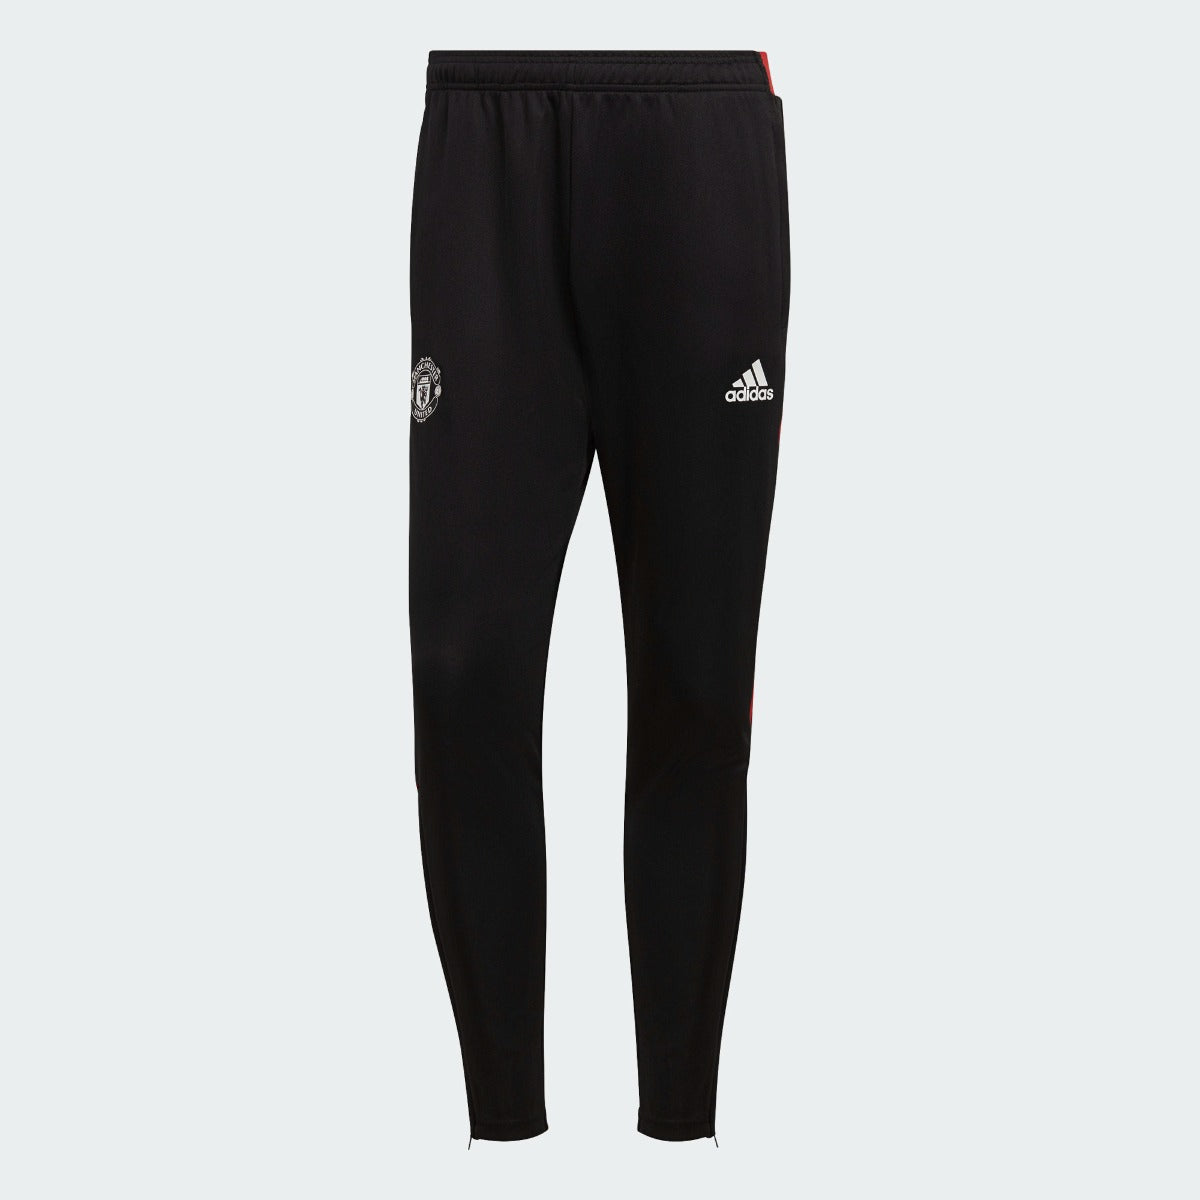 Adidas 2021-22 Manchester United Training Pants - Black-Red (Front)